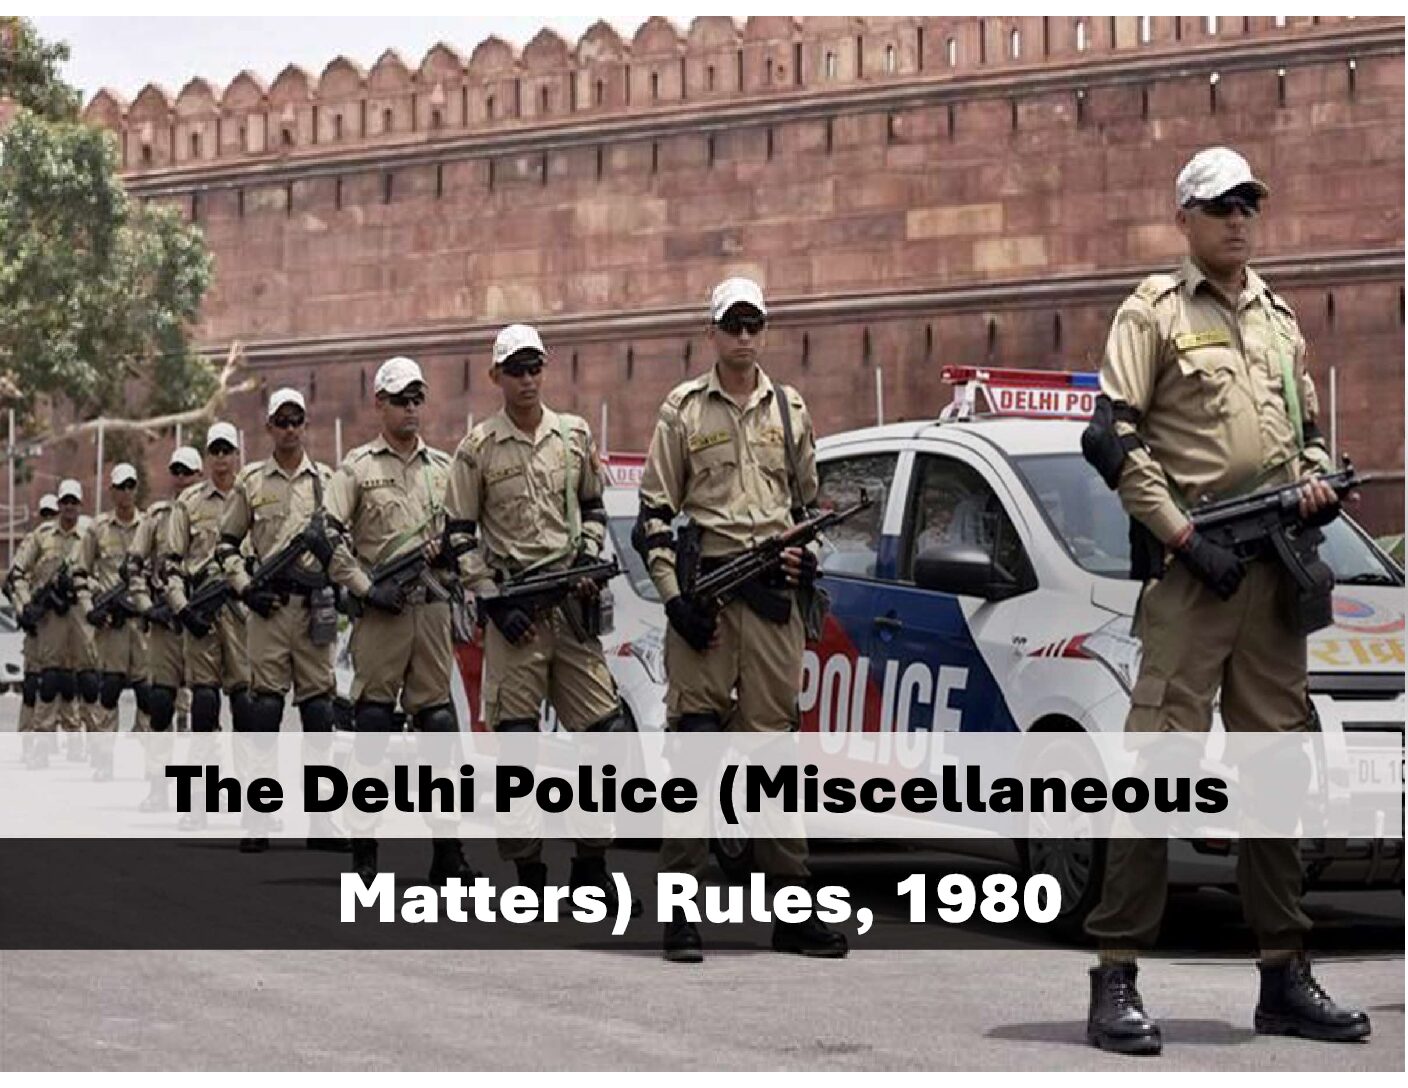 THE DELHI POLICE (MISCELLANEOUS MATTERS) RULES, 1980